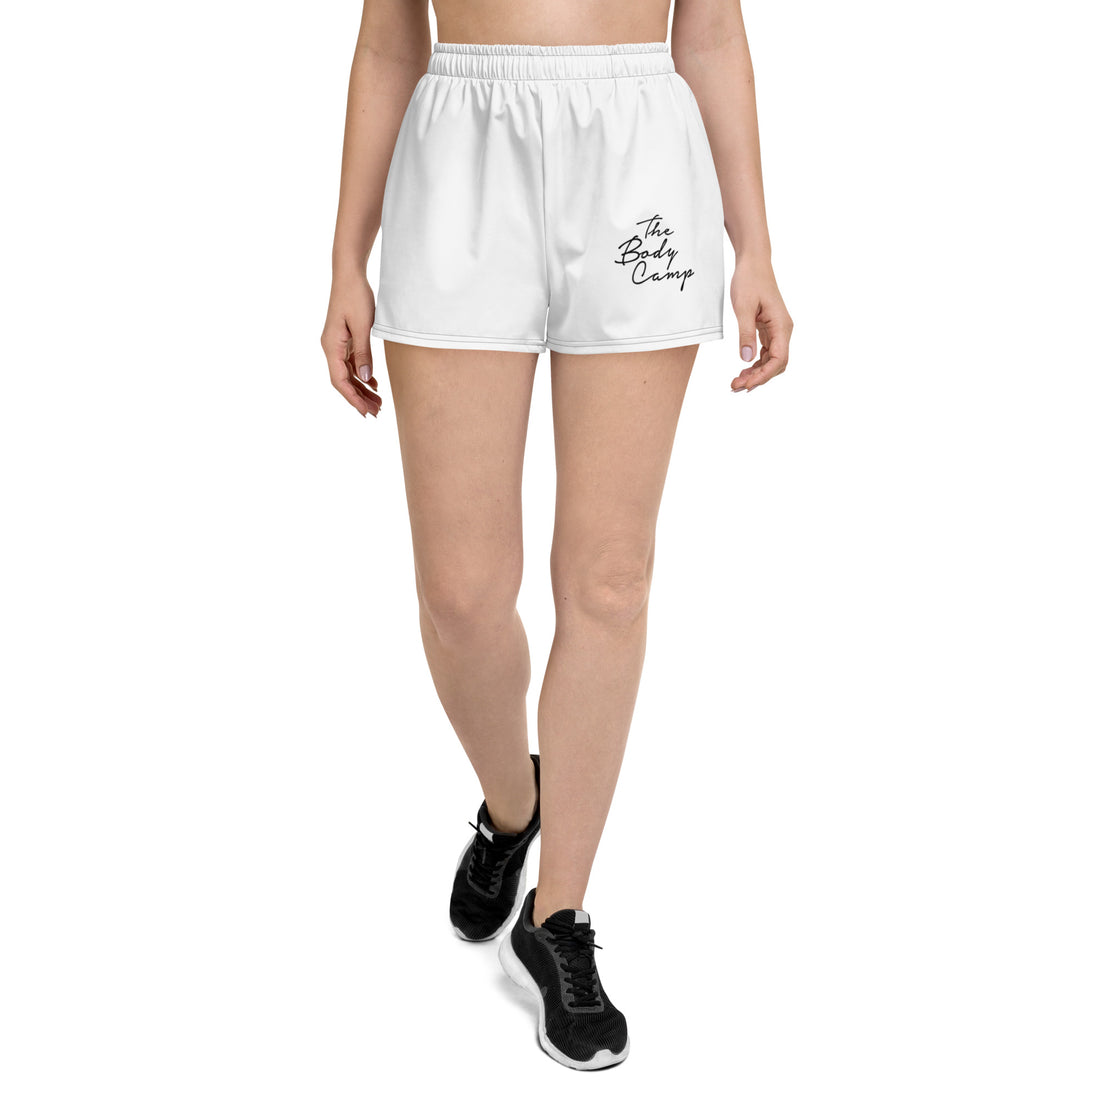 The Body Camp Women’s Recycled Athletic Shorts